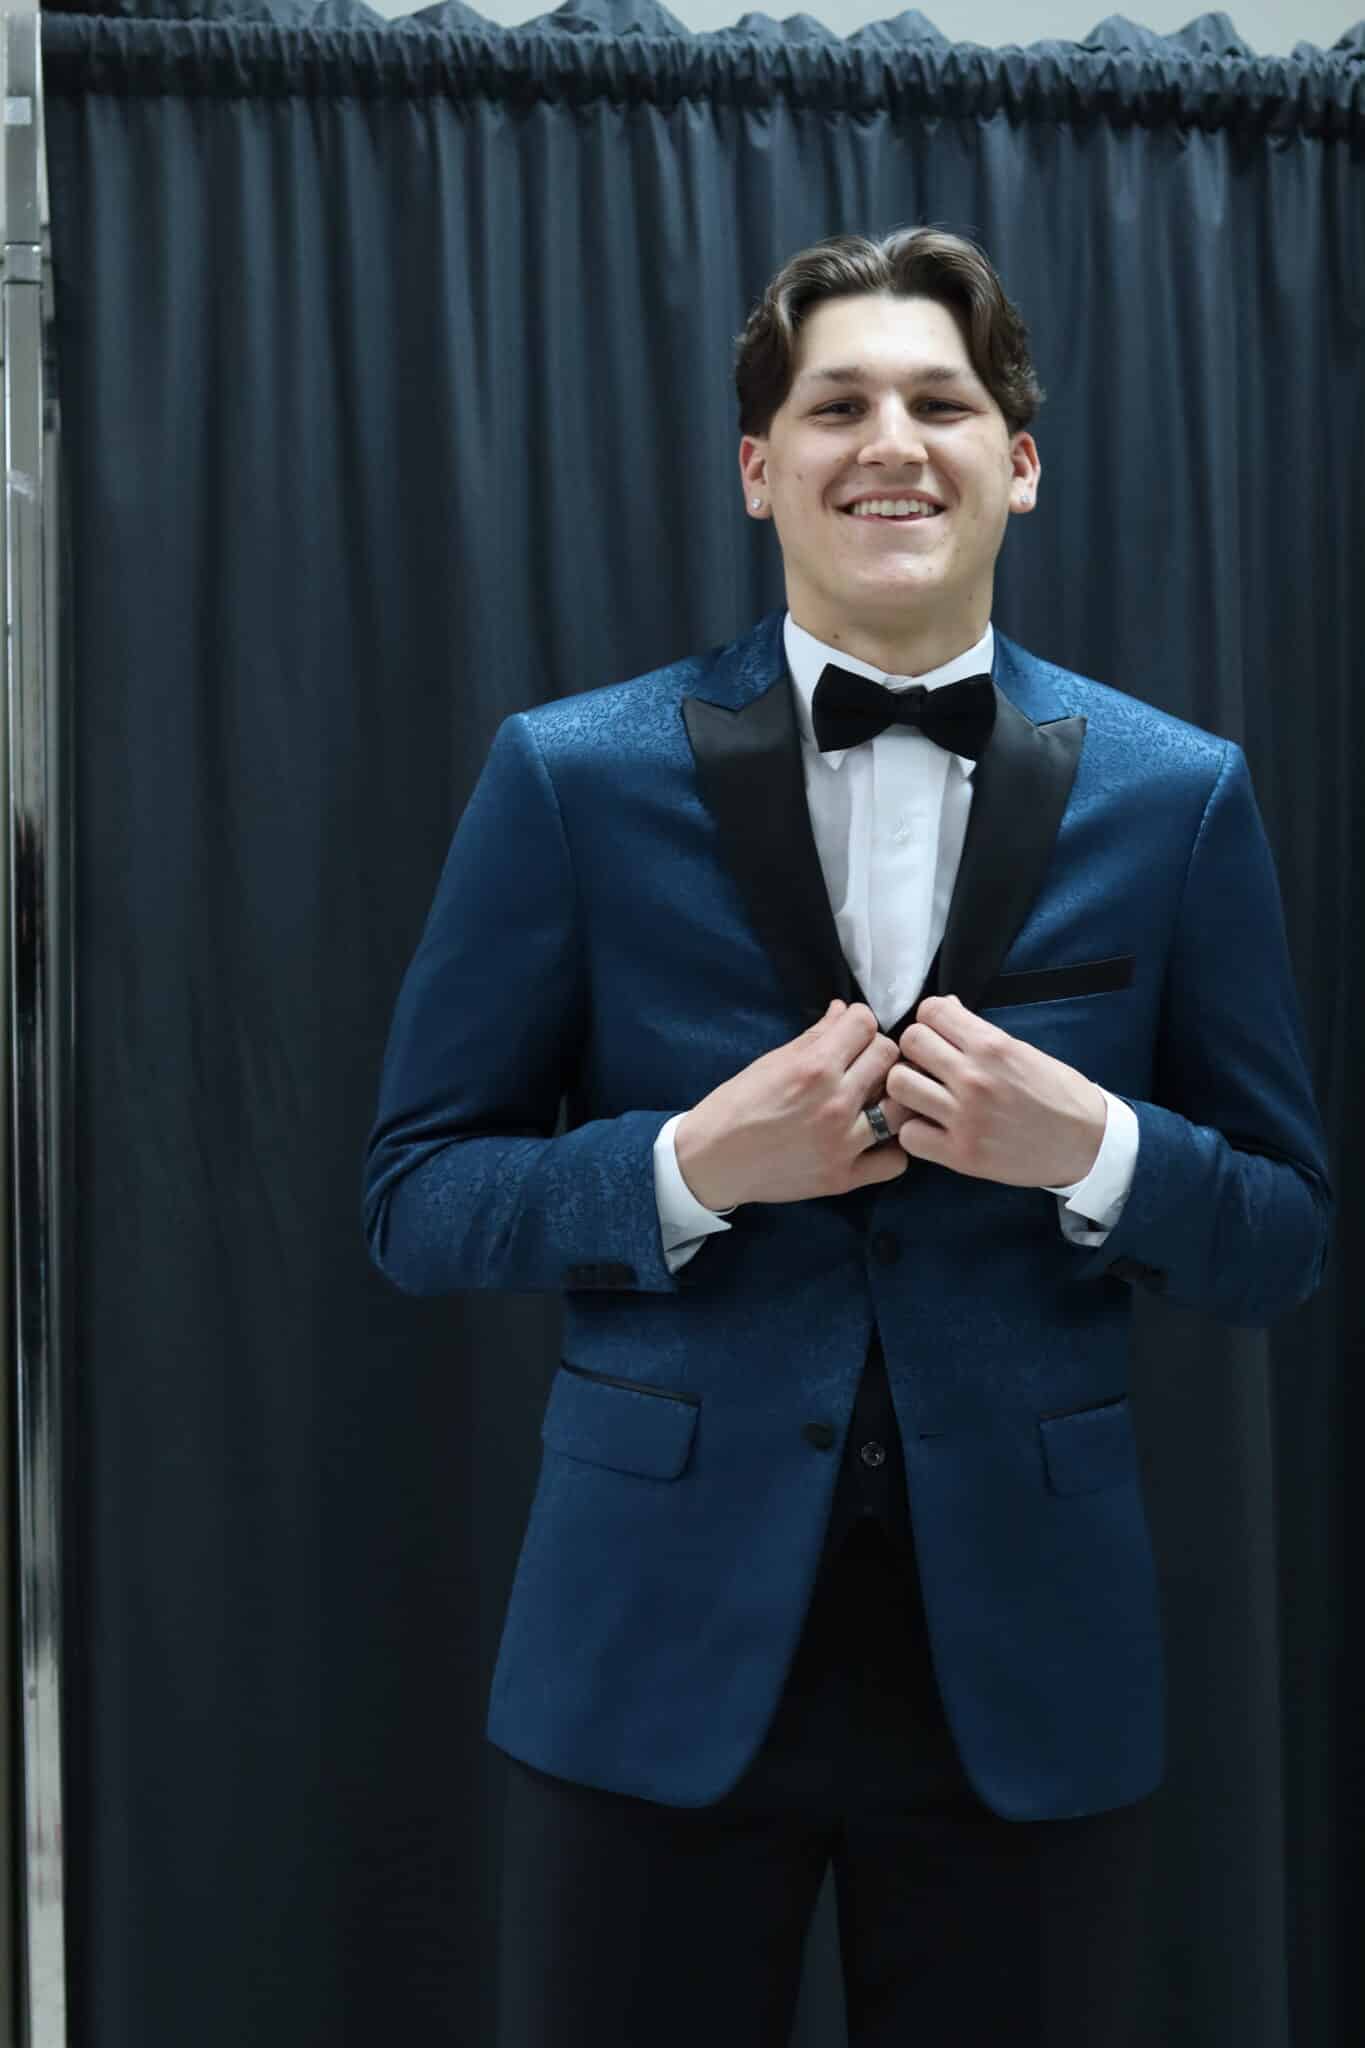 A young man in the Paisley Slim Fit Tuxedo posing for a photo during his tuxedo rental.